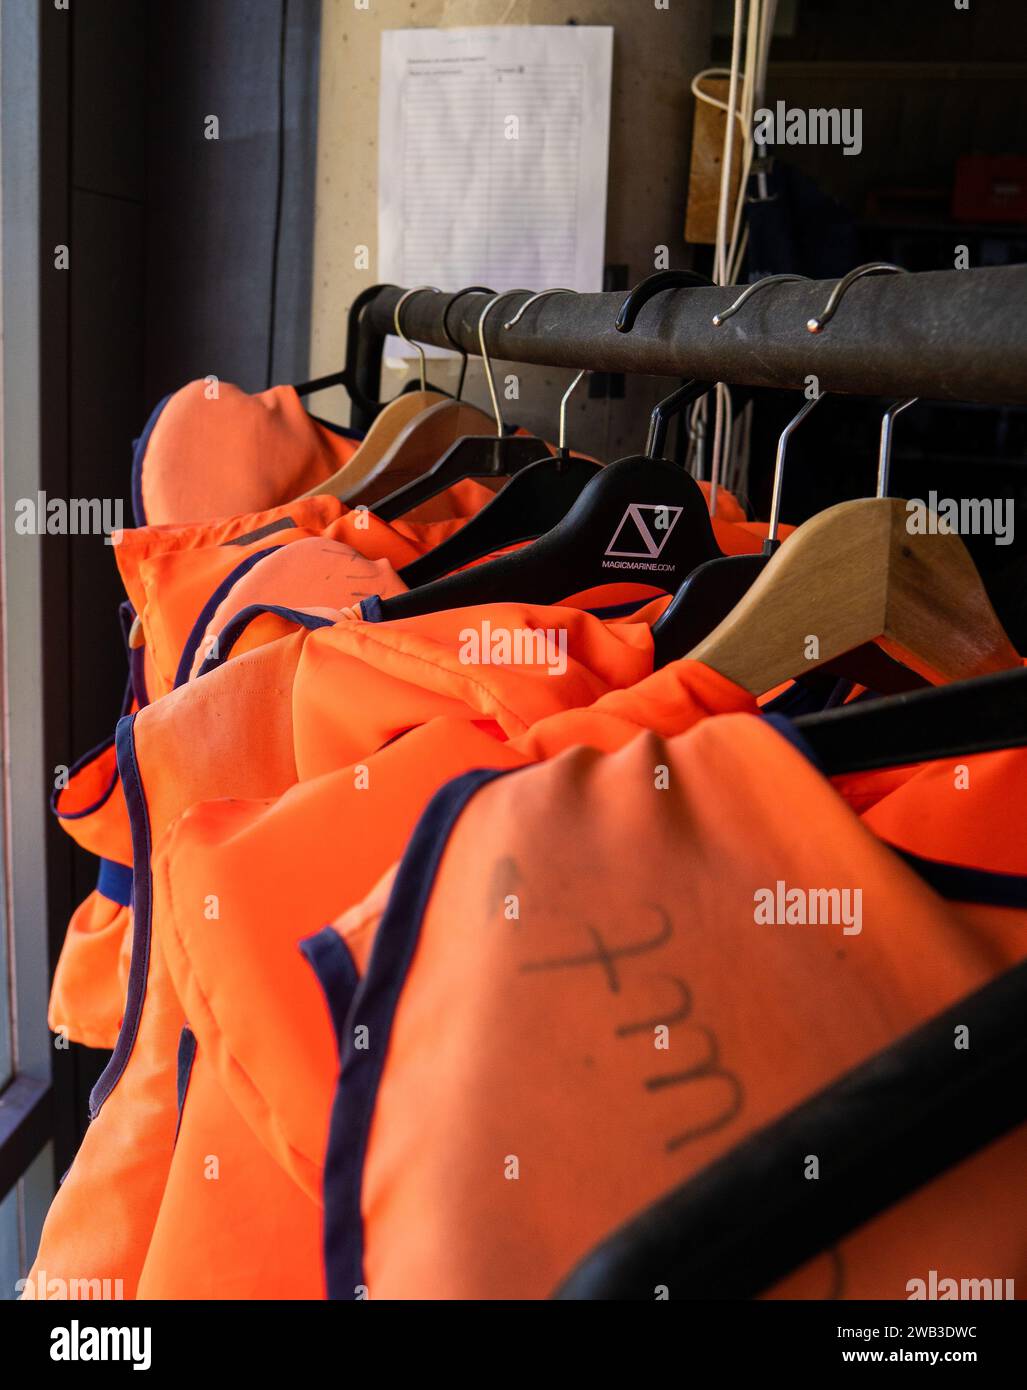 A rack of emergency floating jackets on hangers Stock Photo